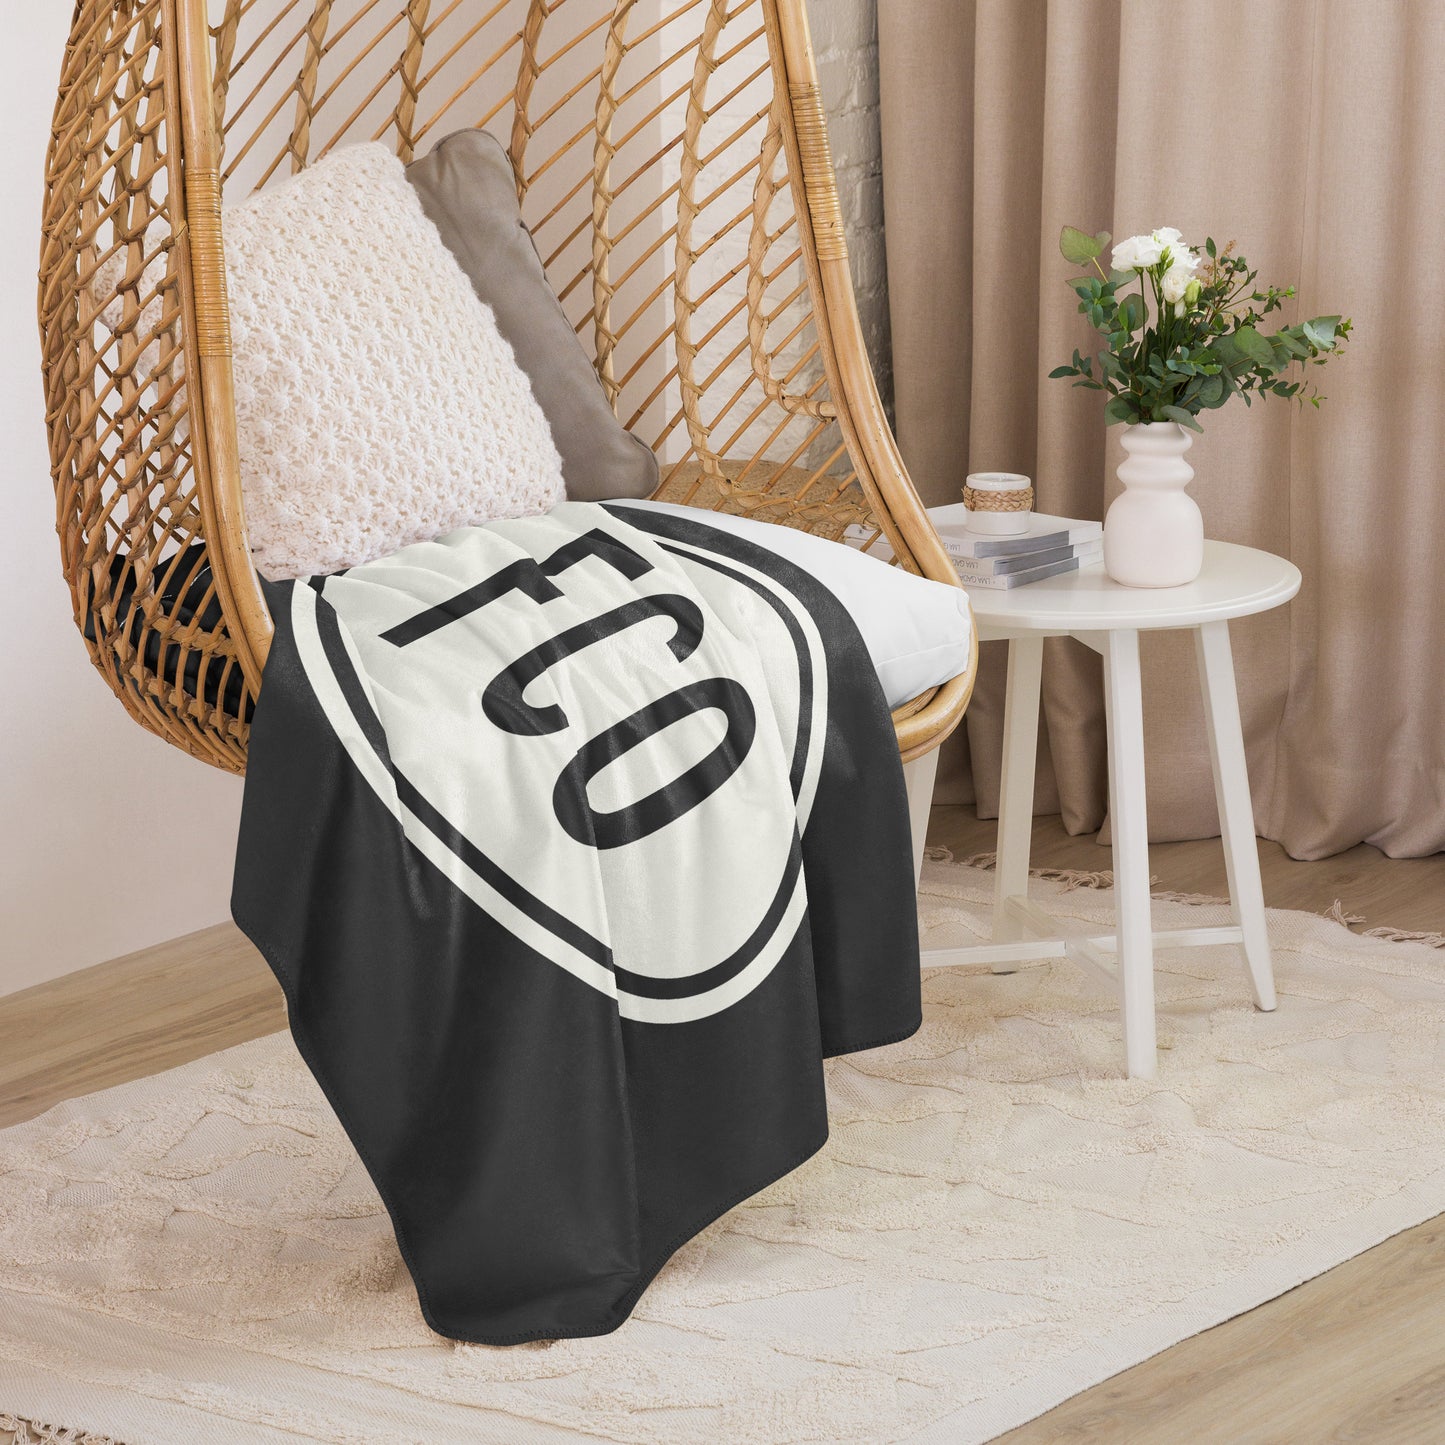 Unique Travel Gift Sherpa Blanket - White Oval • FCO Rome • YHM Designs - Image 06